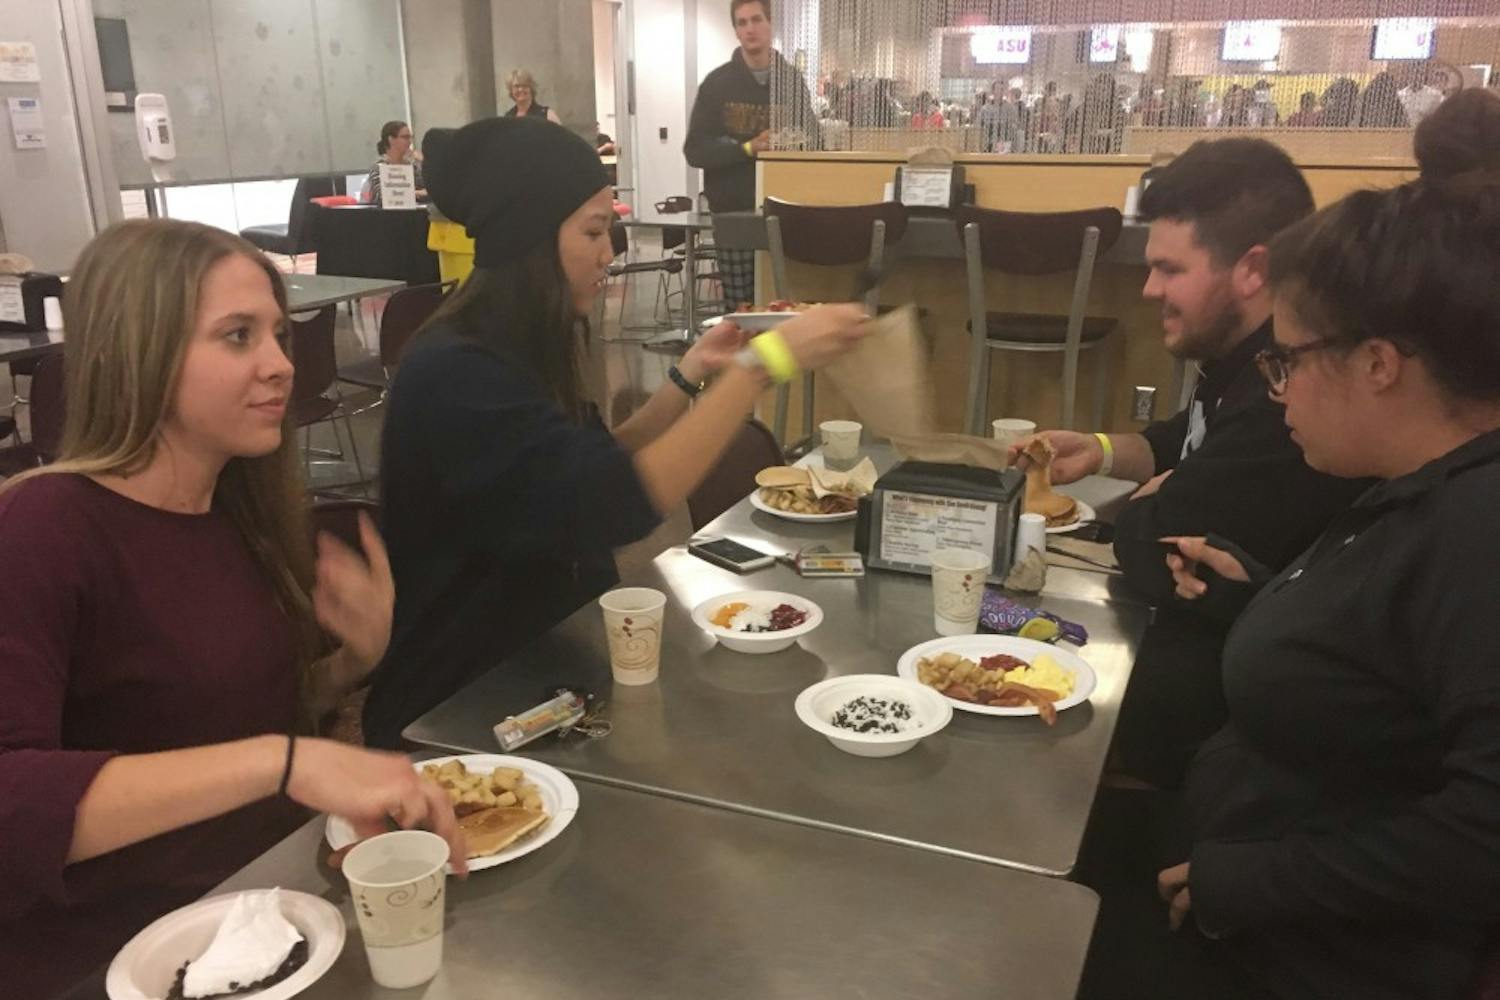 Students enjoy breakfast for dinner as part of the finals dinner hosted at the Taylor Place dining hall on Nov. 30.